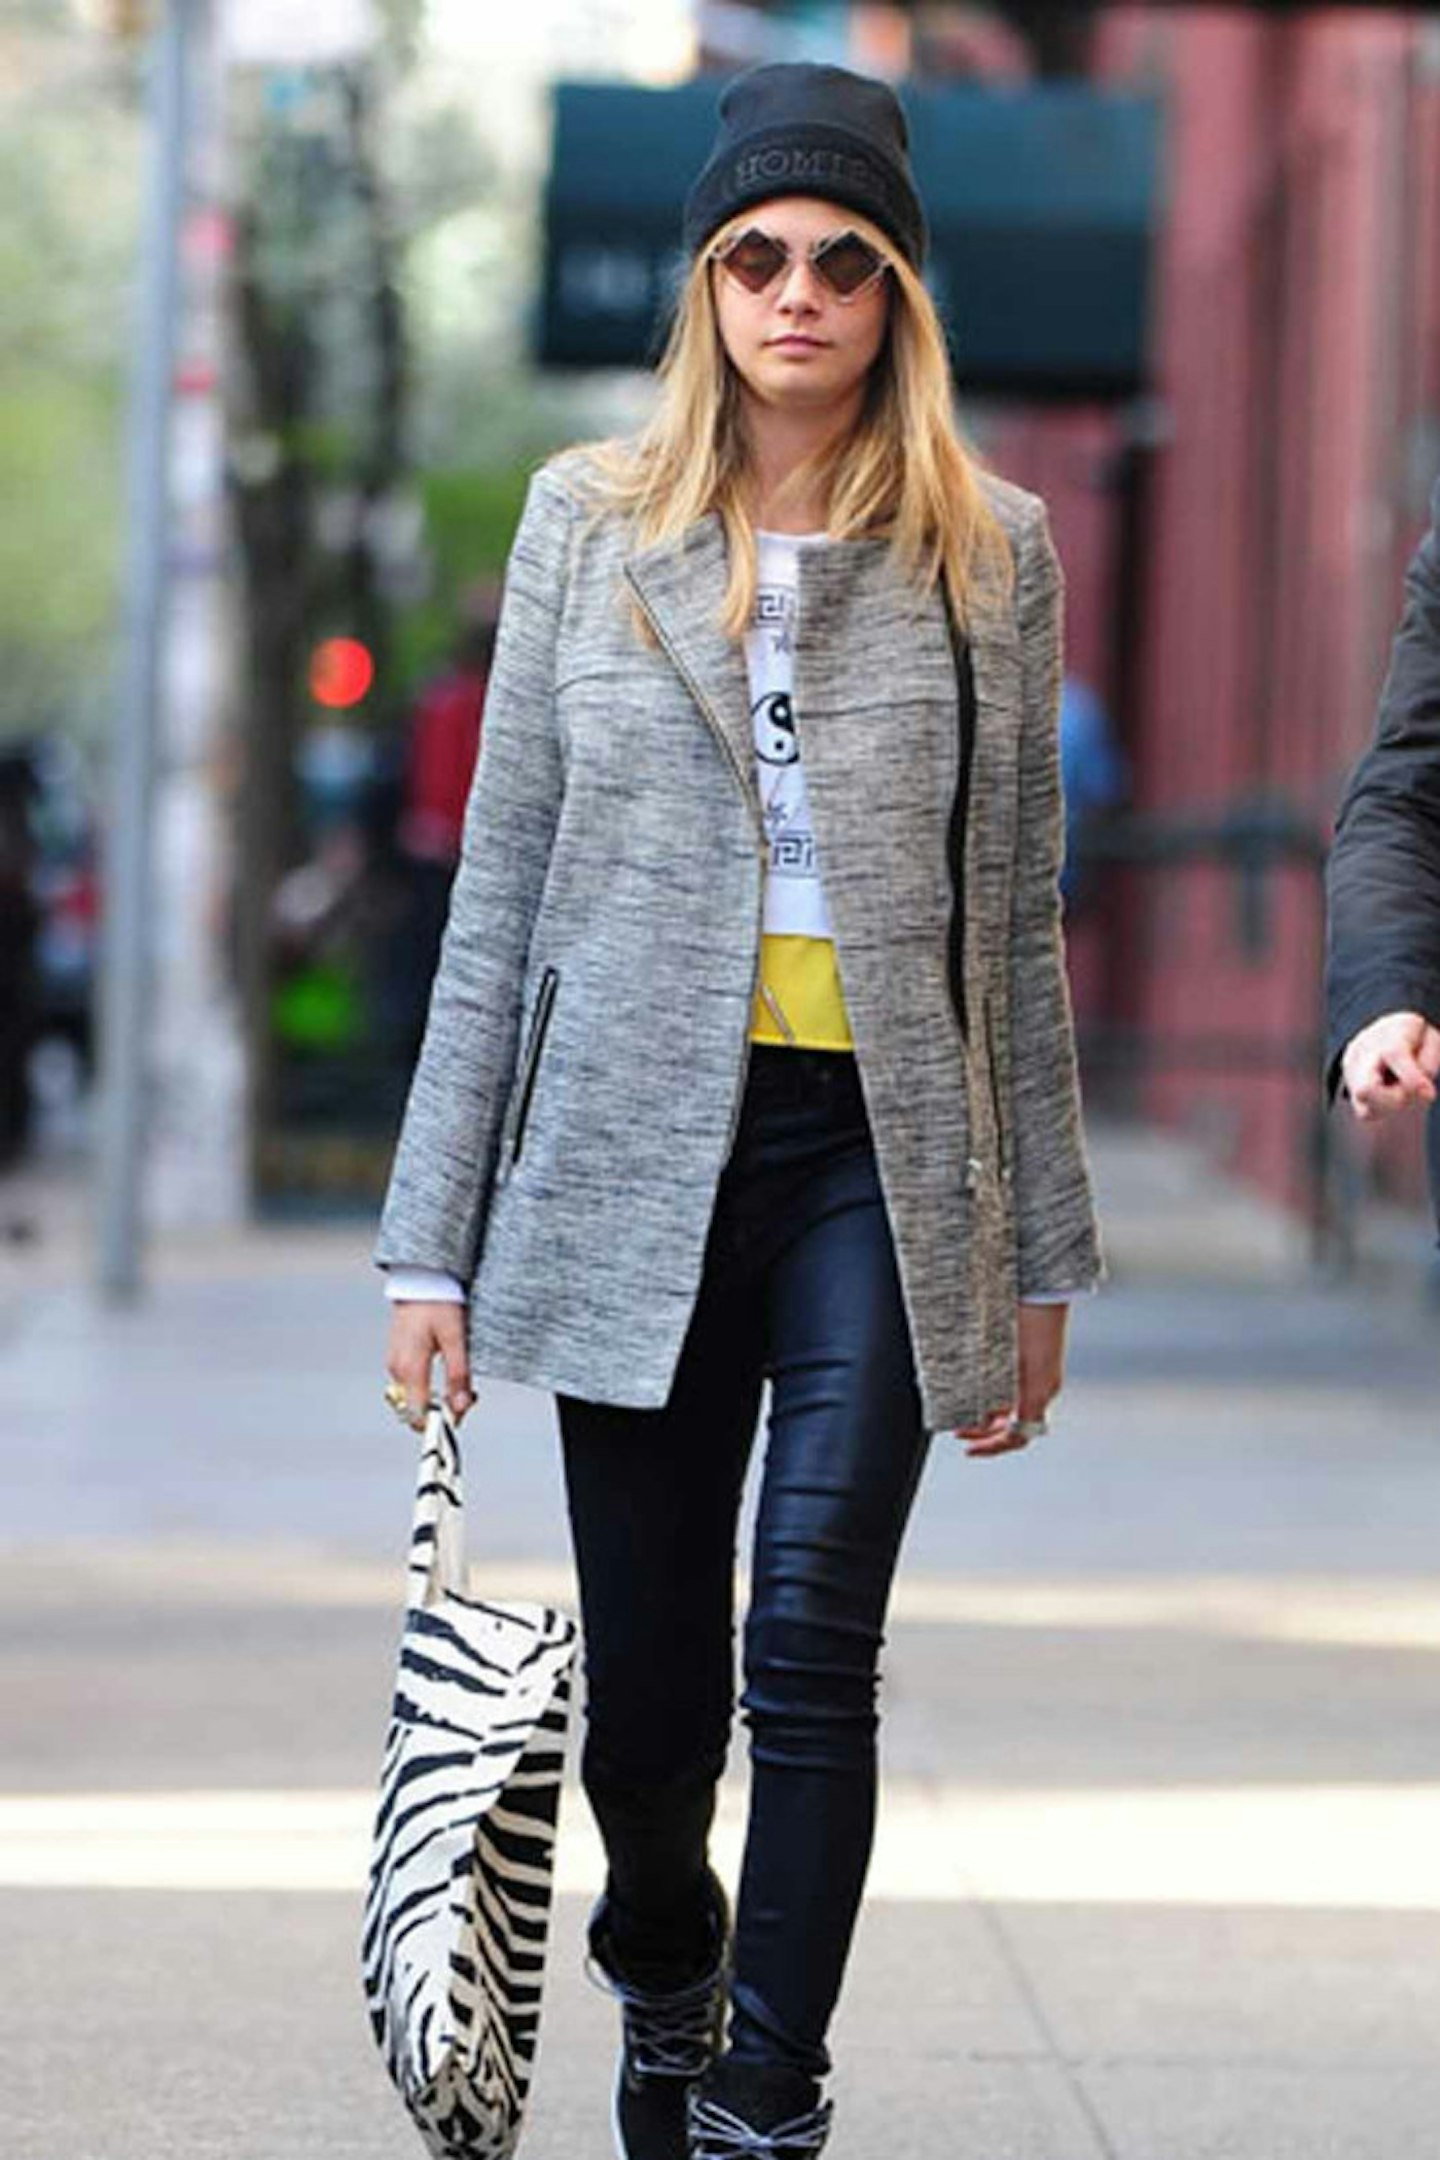 Cara Delevingne style leather skinny jeans